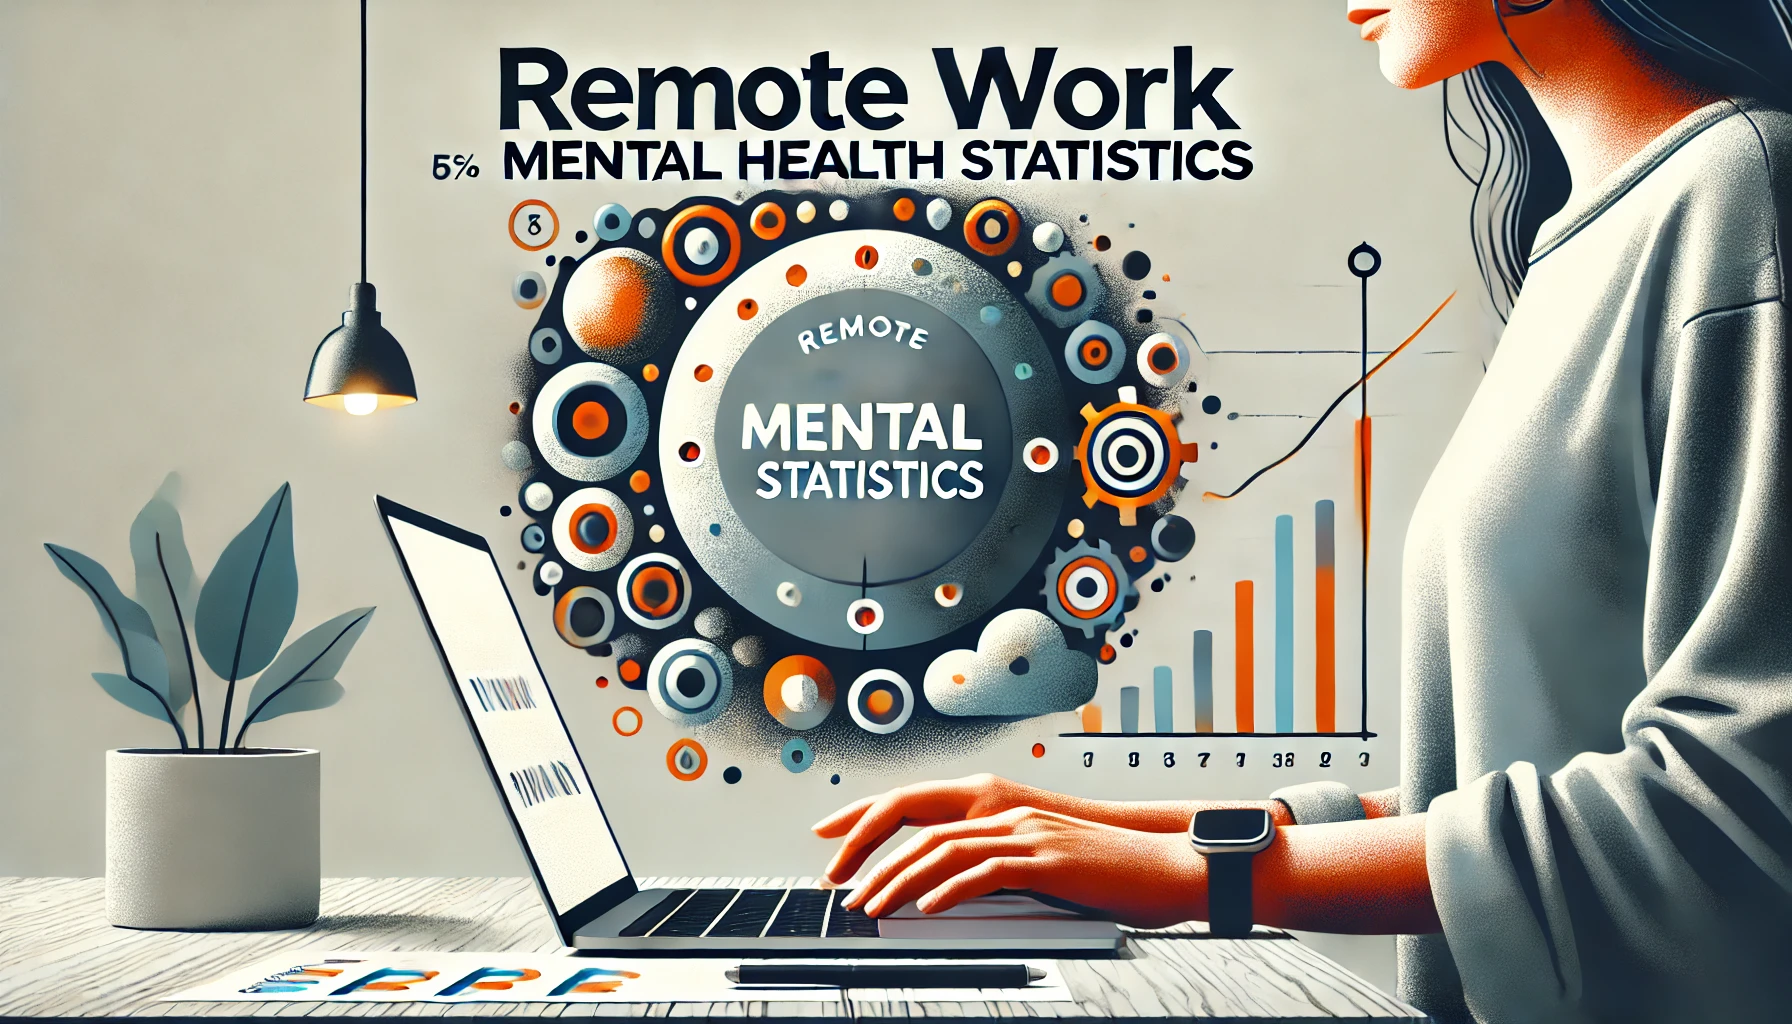 Remote Work Mental Health Statistics By Share of People Feeling Burnout and Stress Levels